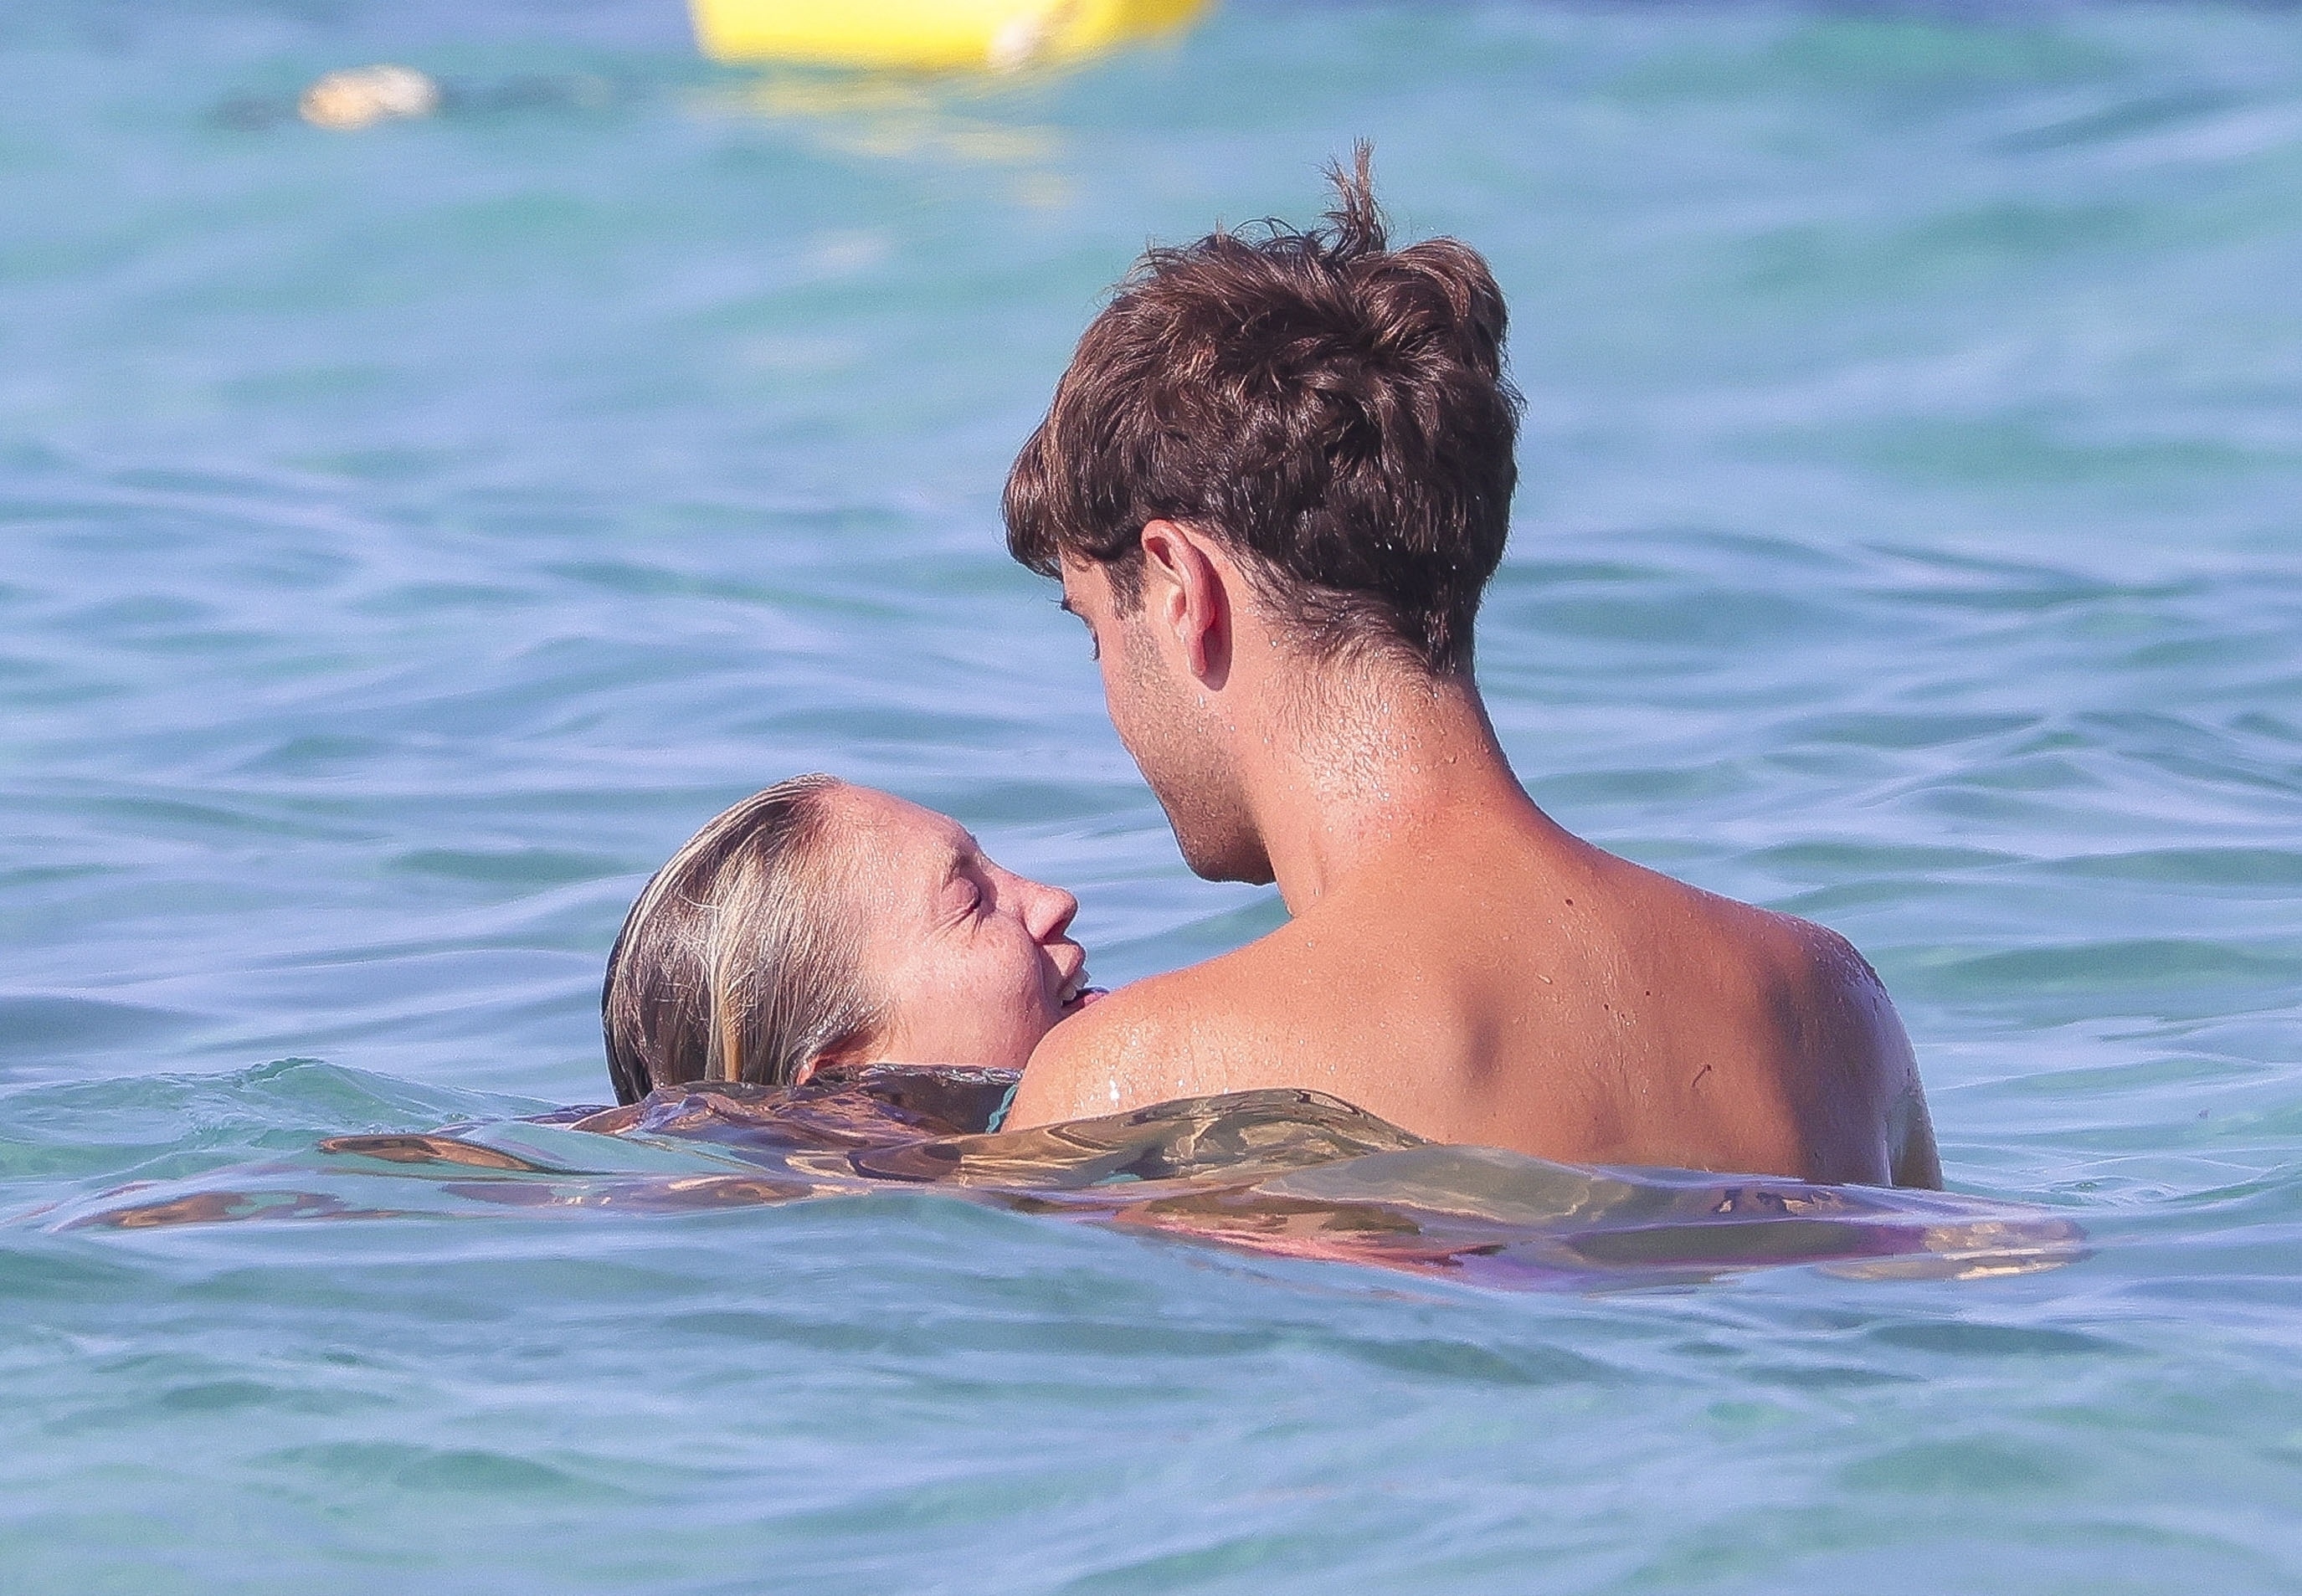 Lila looked completely loved up with her boyfriend as they played in the sea